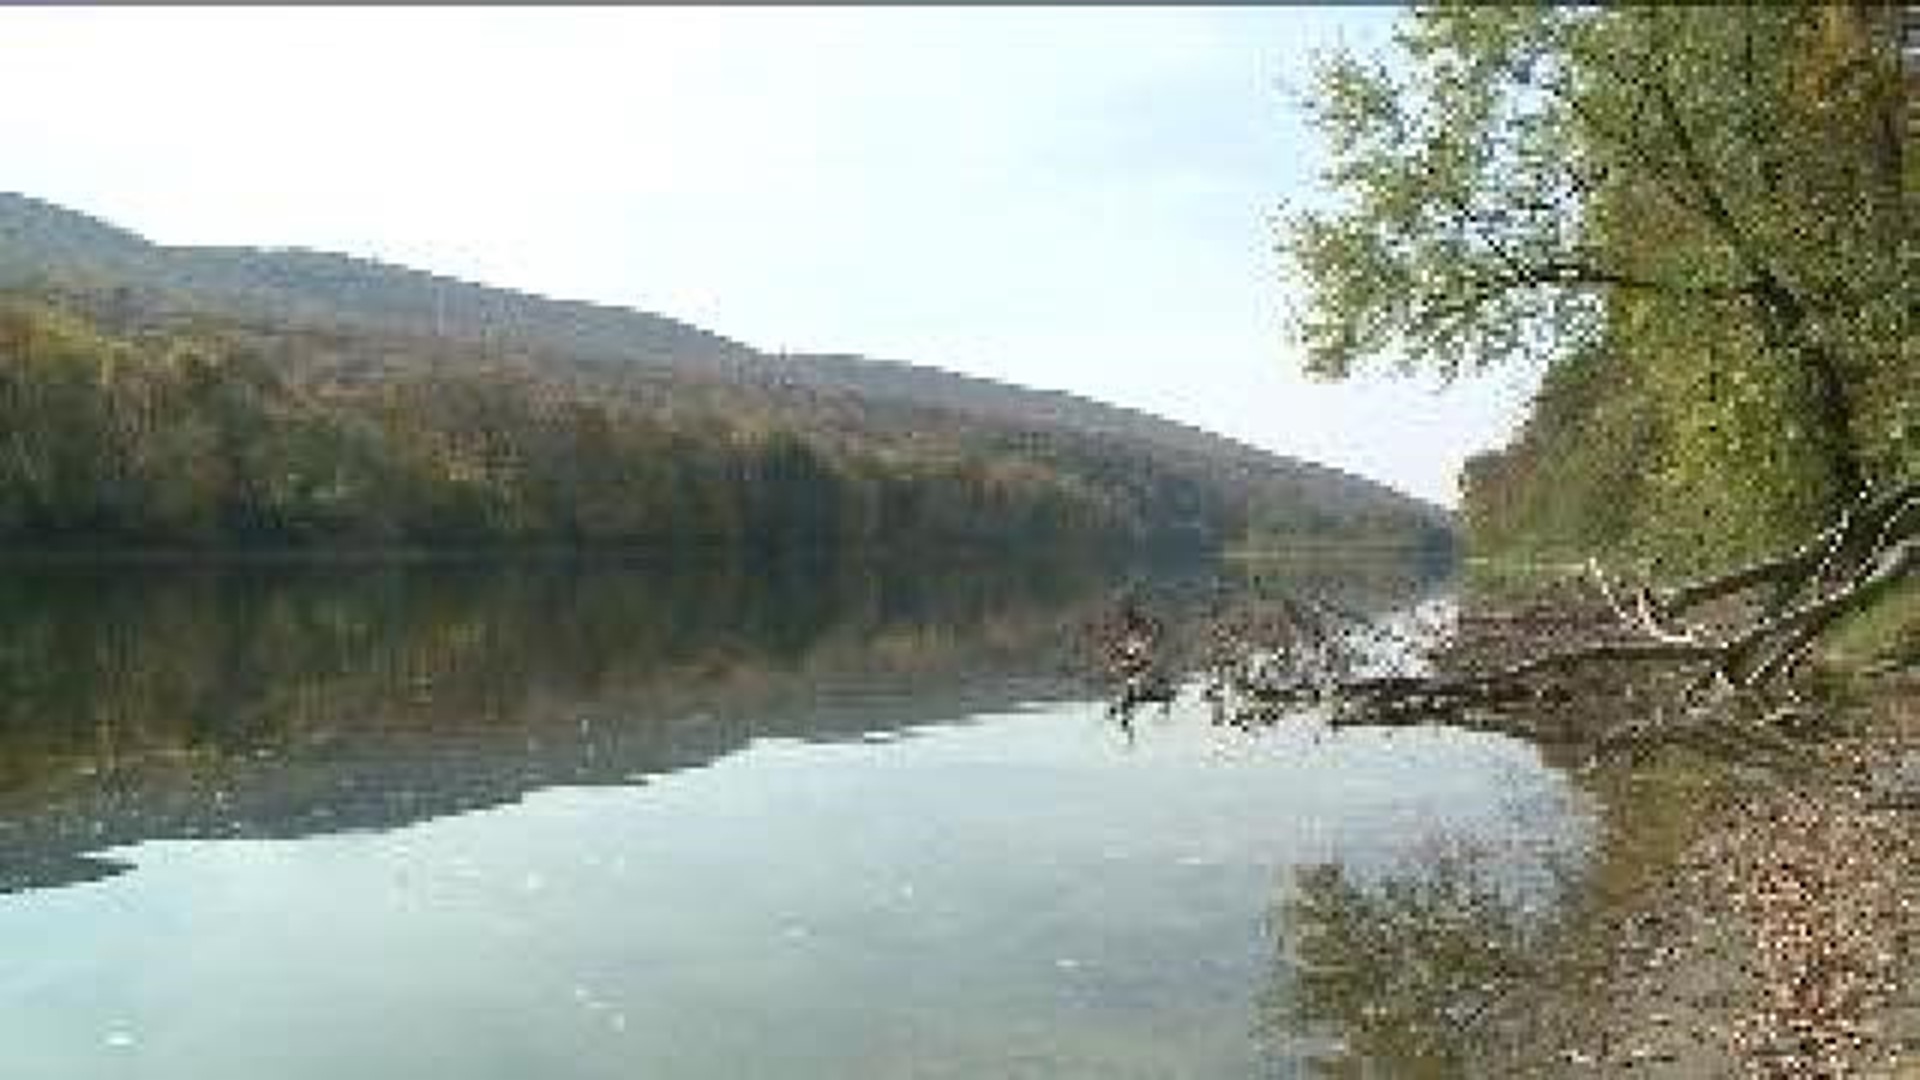 Bikers, Boaters Excited to Head Back to Gap After Shutdown